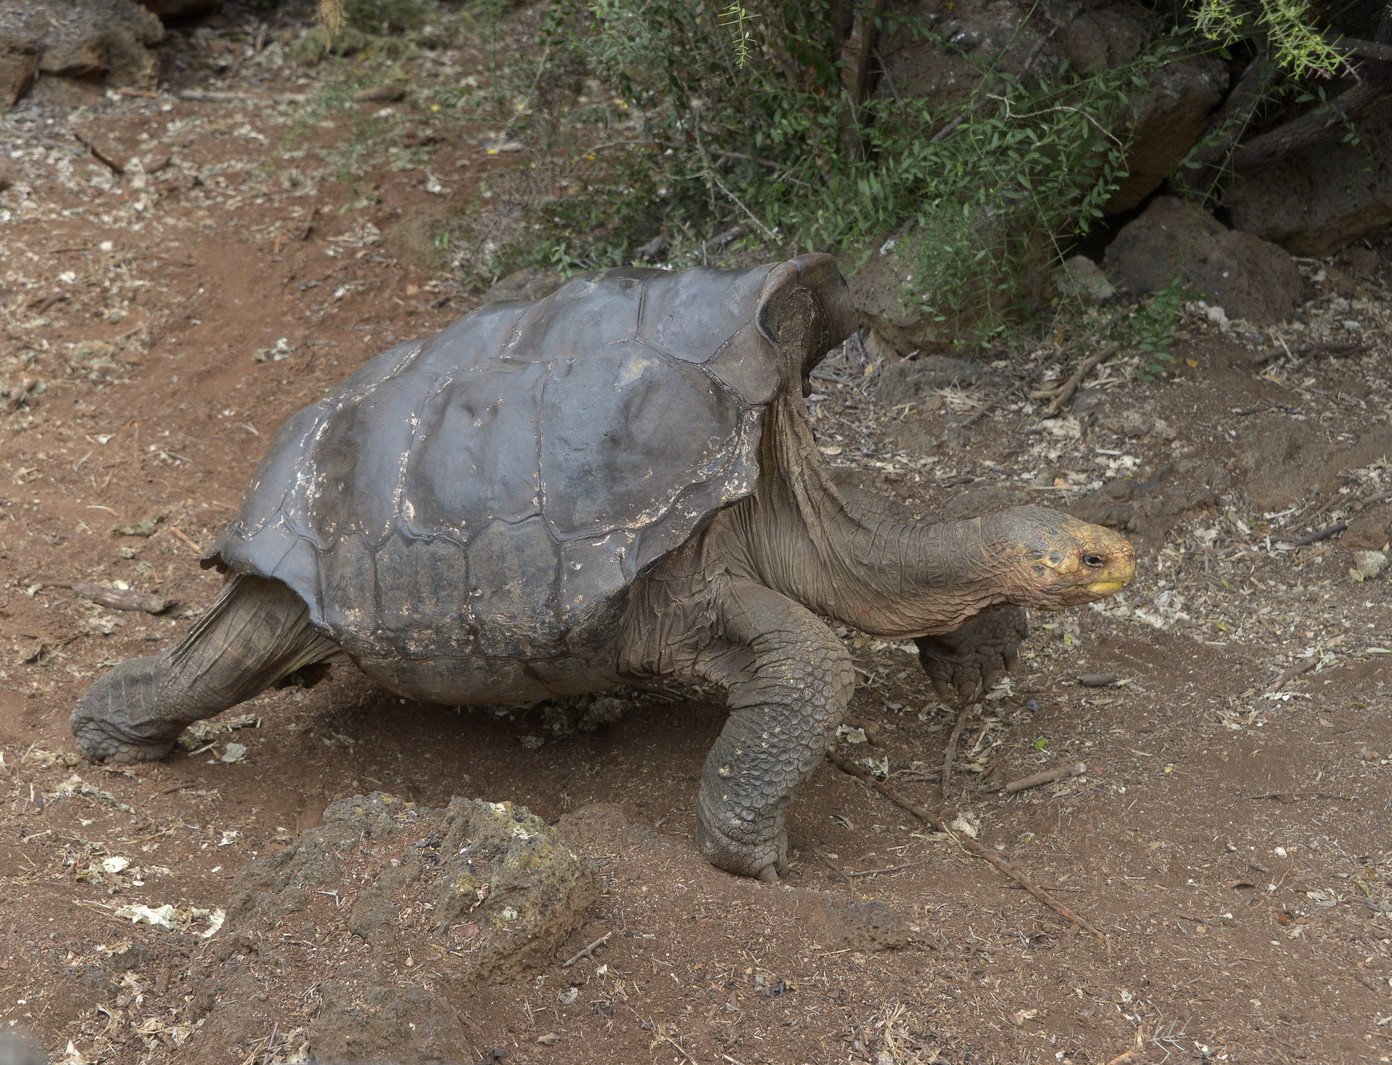 how a 100 year old tortoise single handedly saved his species from extinction